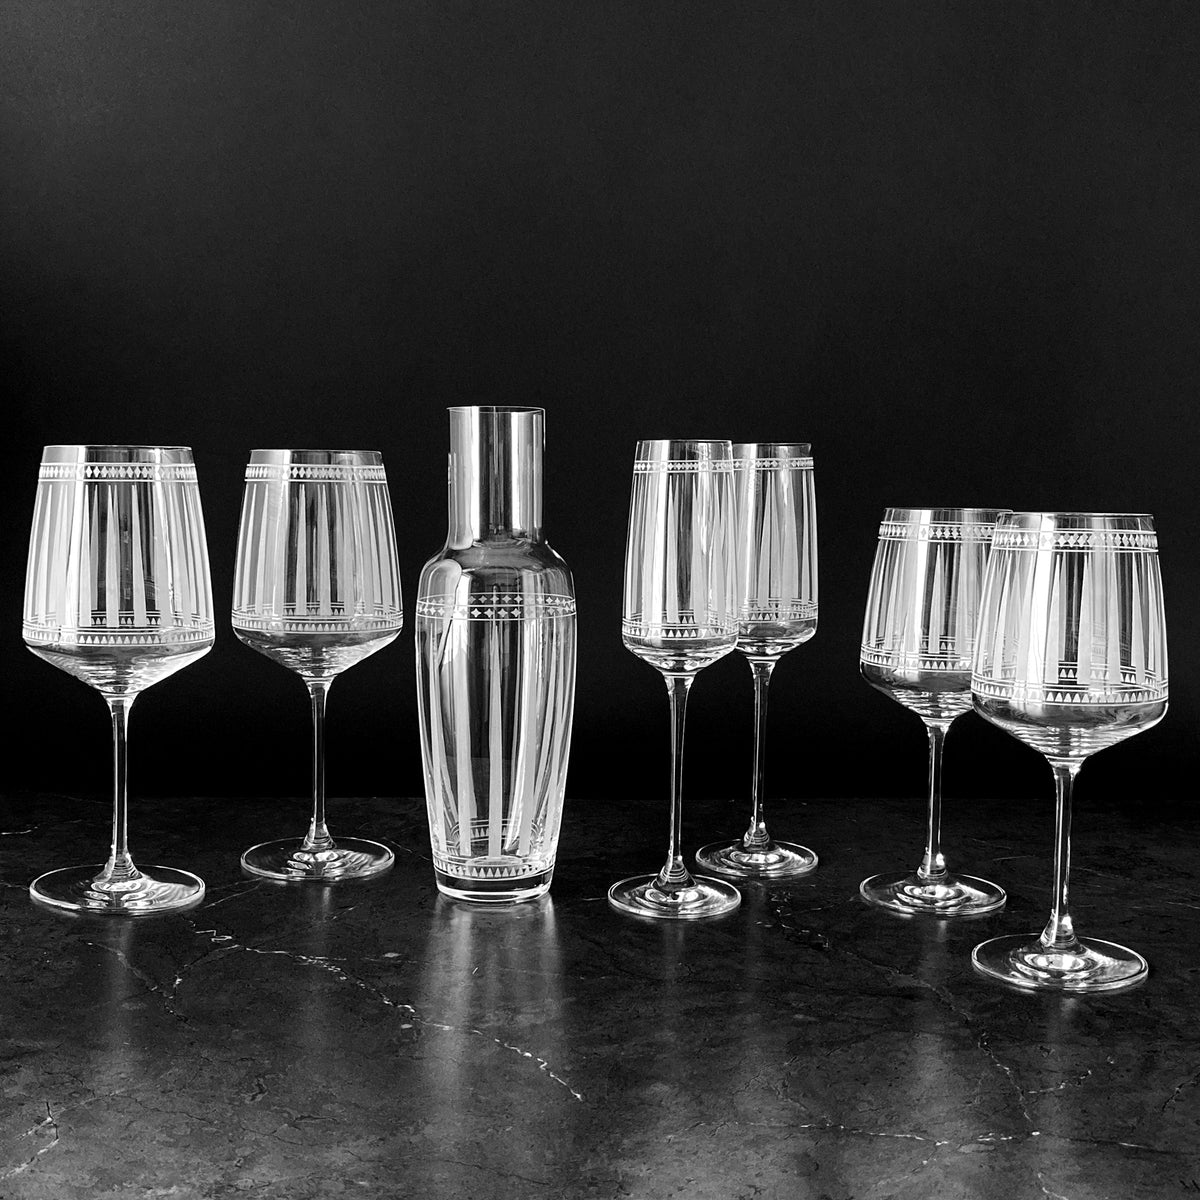 A black and white photo of a set of Marrakech Carafe wine glasses and a Caskata Artisanal Home decanter with graphic patterns inspired by Art Deco, reminiscent of the stylish elegance found in Marrakech.